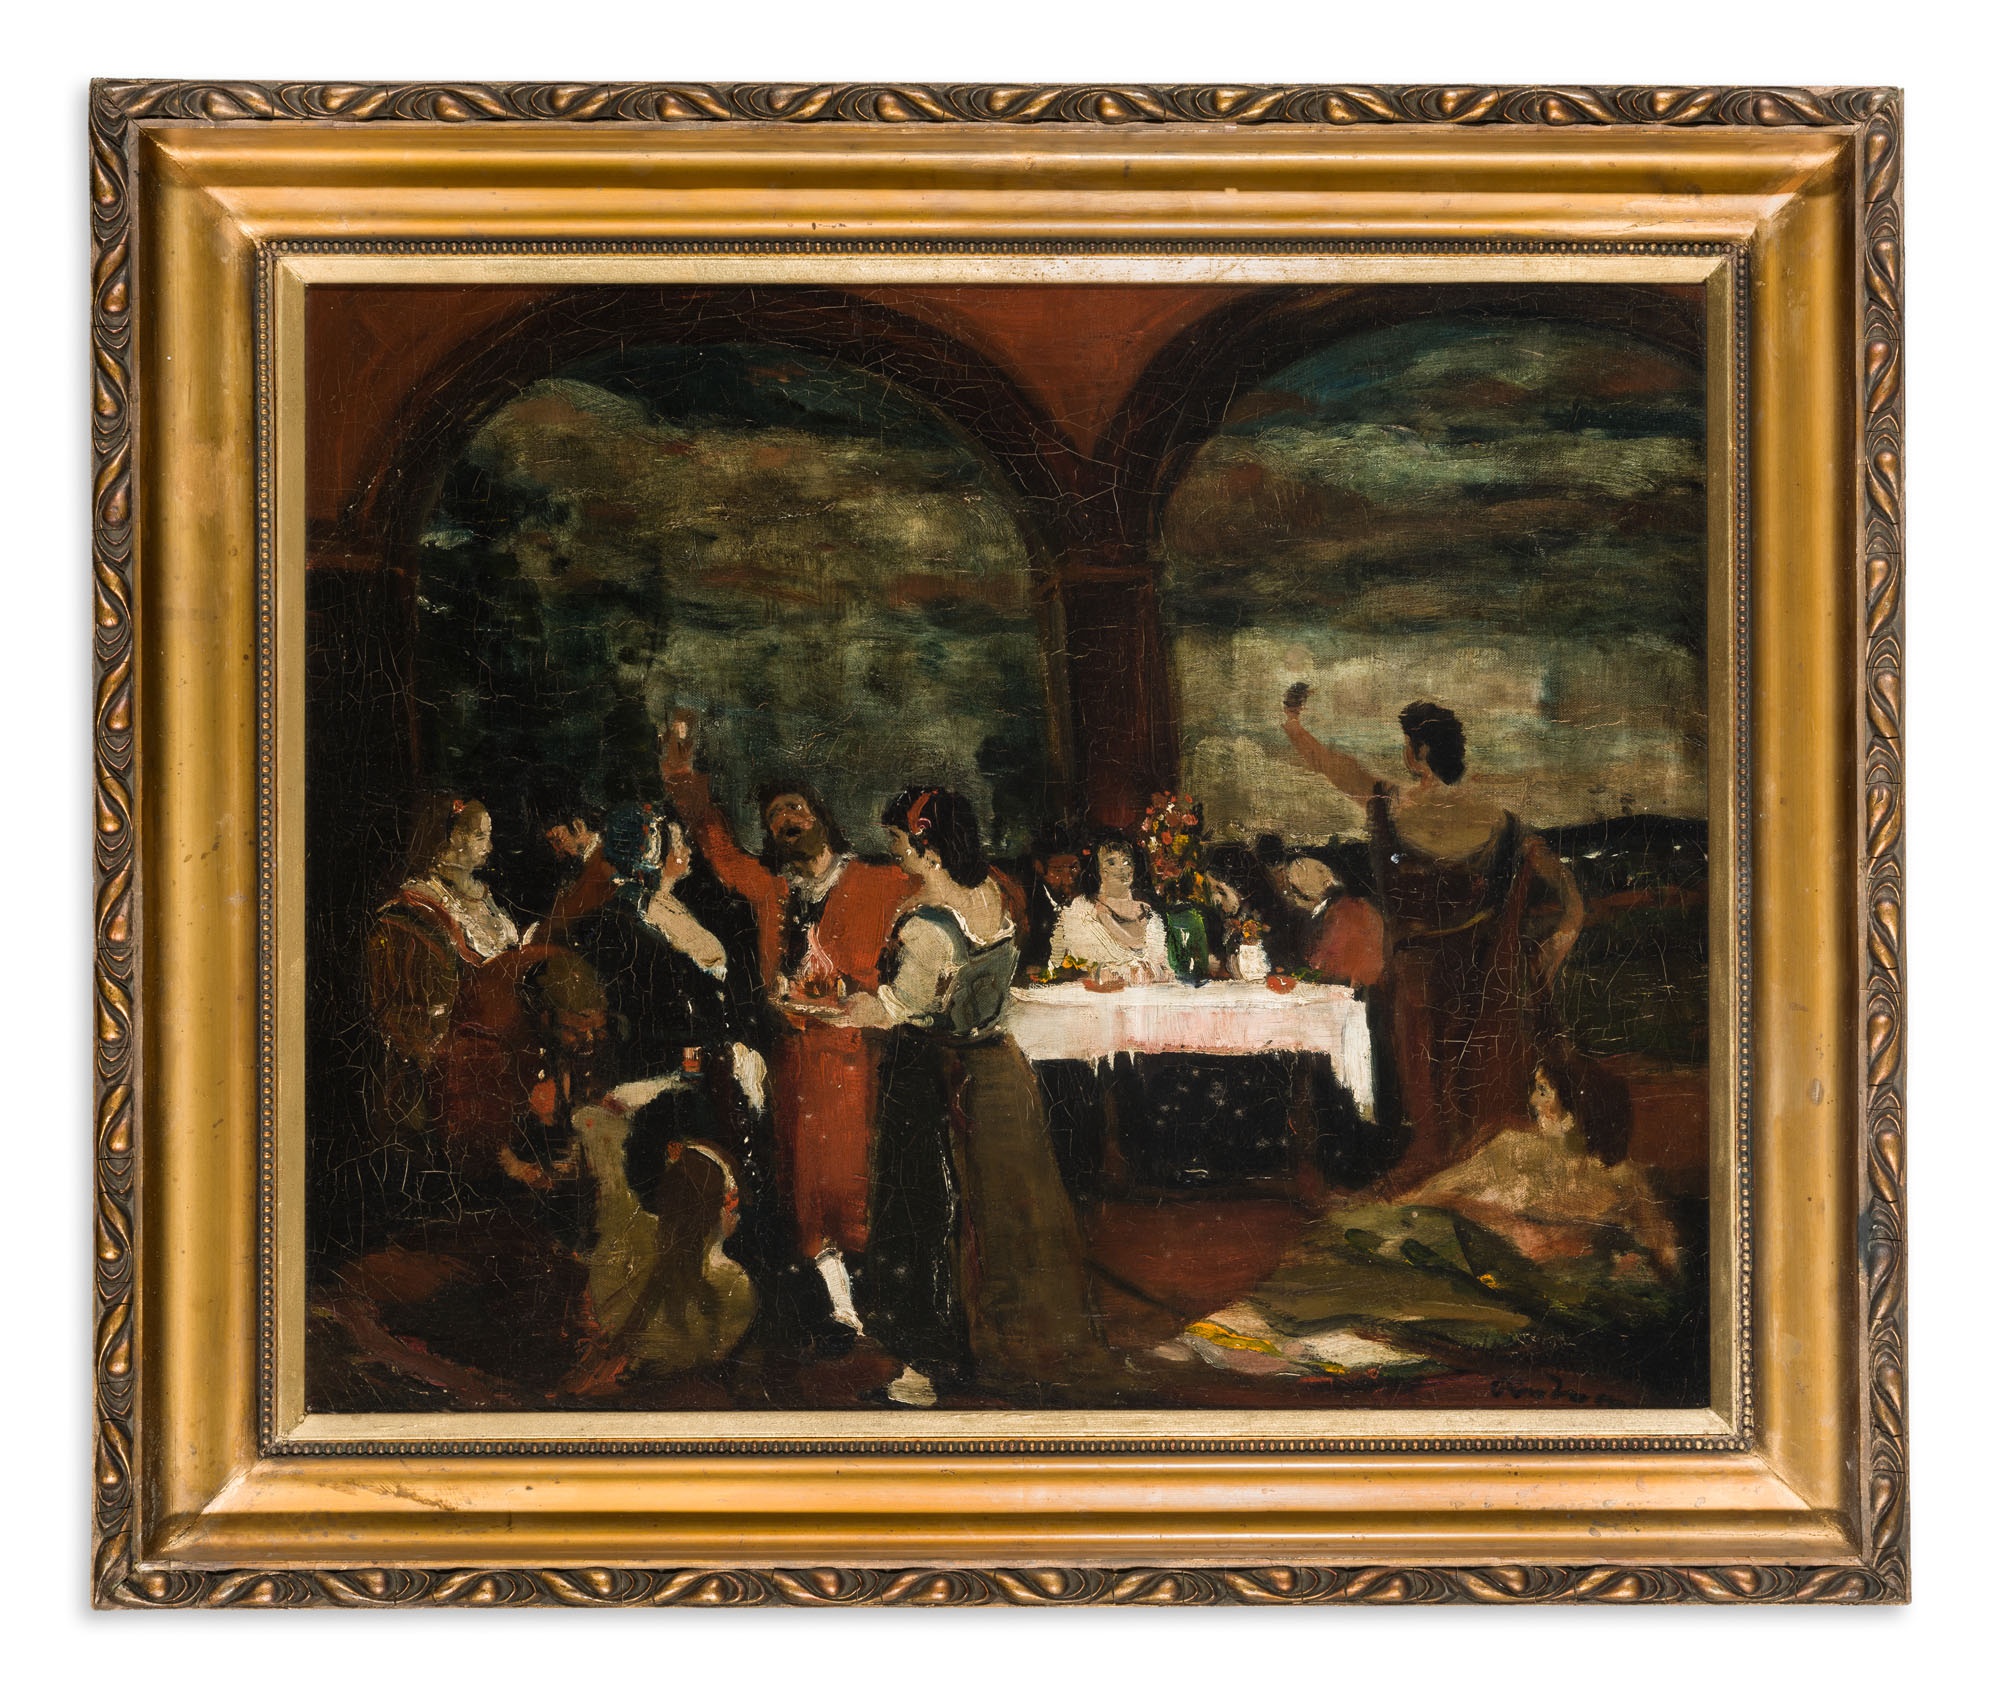 Gyula Rudnay: untitled (historical banquet scene), (known as “Revelers”) (The Salgo Trust for Education CC BY-NC-SA)